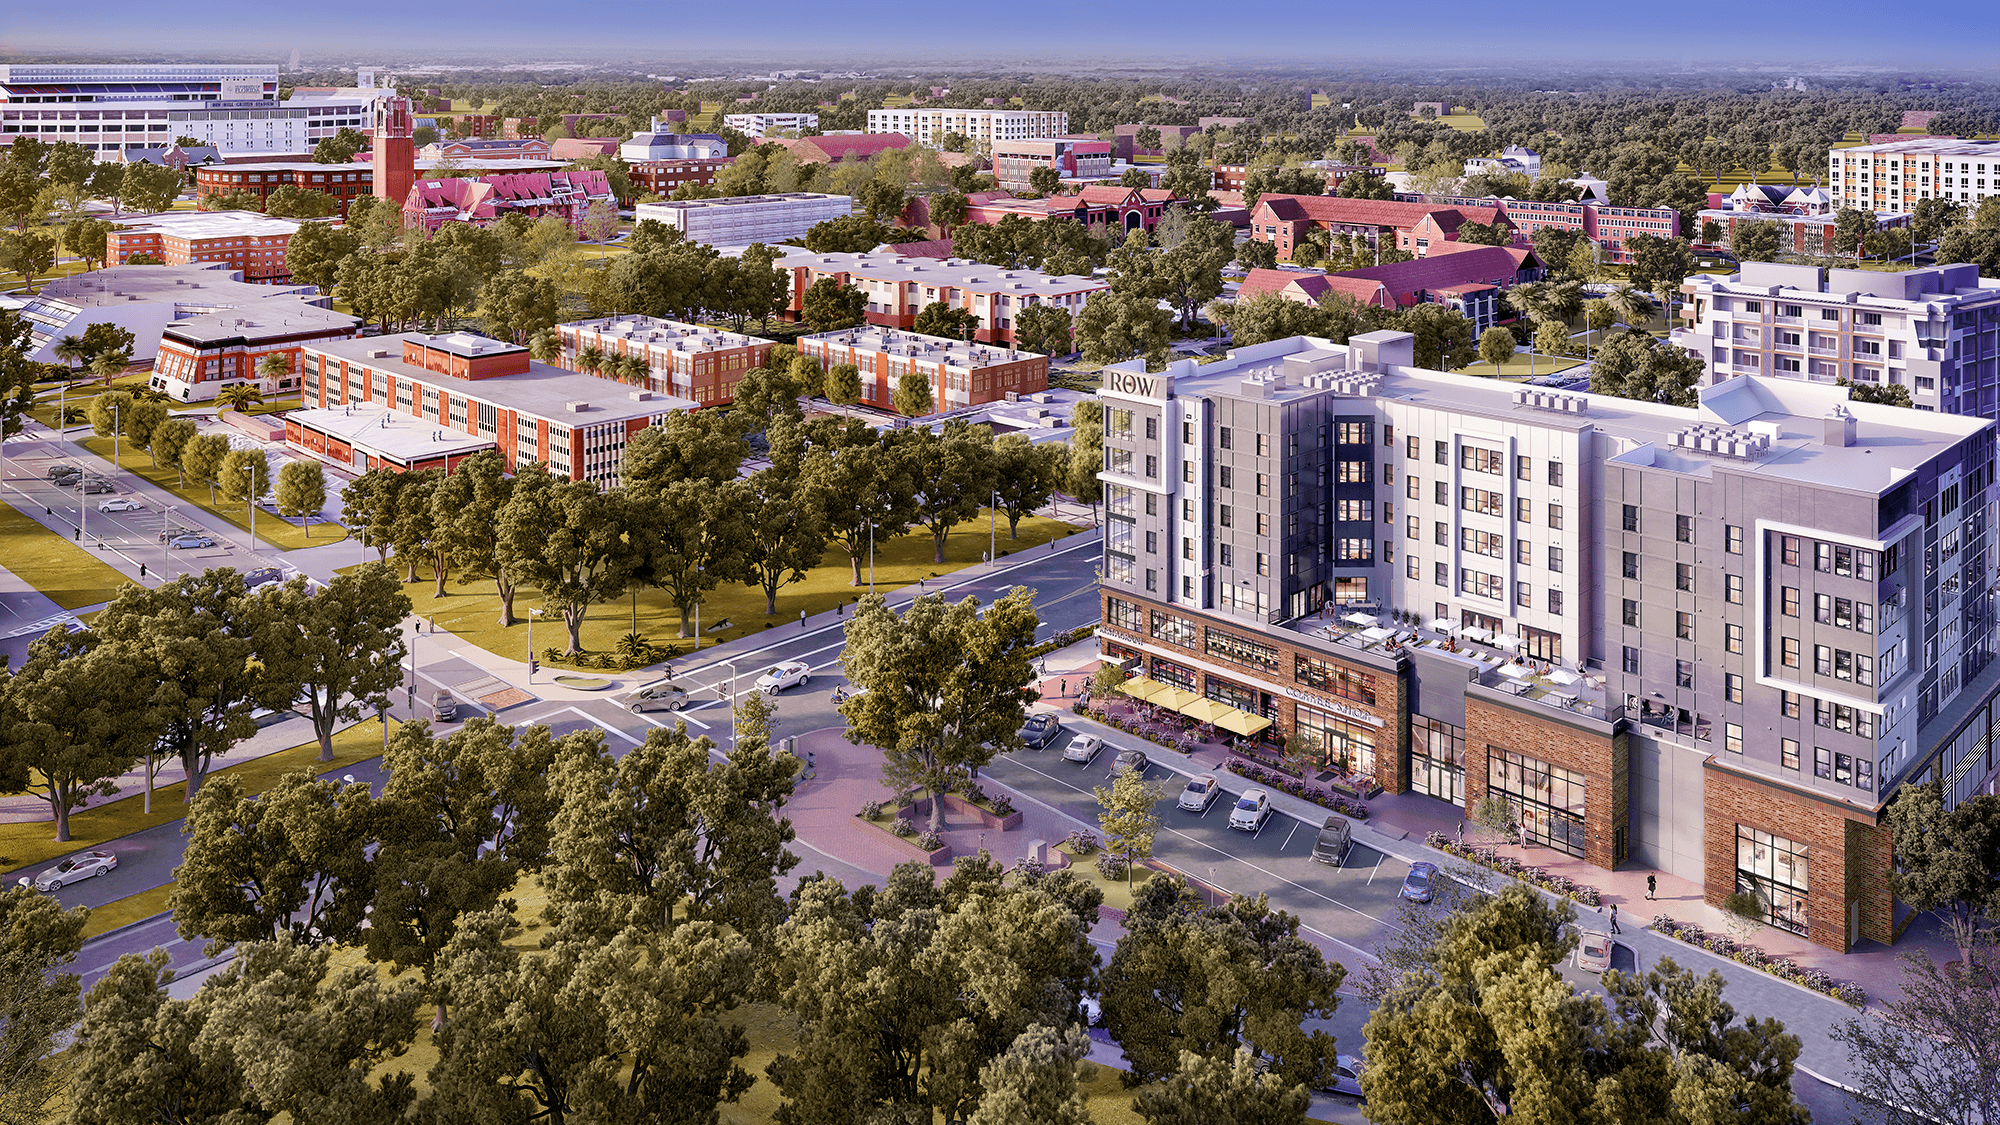 aerial rendering of the exterior of the row, a new student housing development opening in gainesville near uf fall 2023